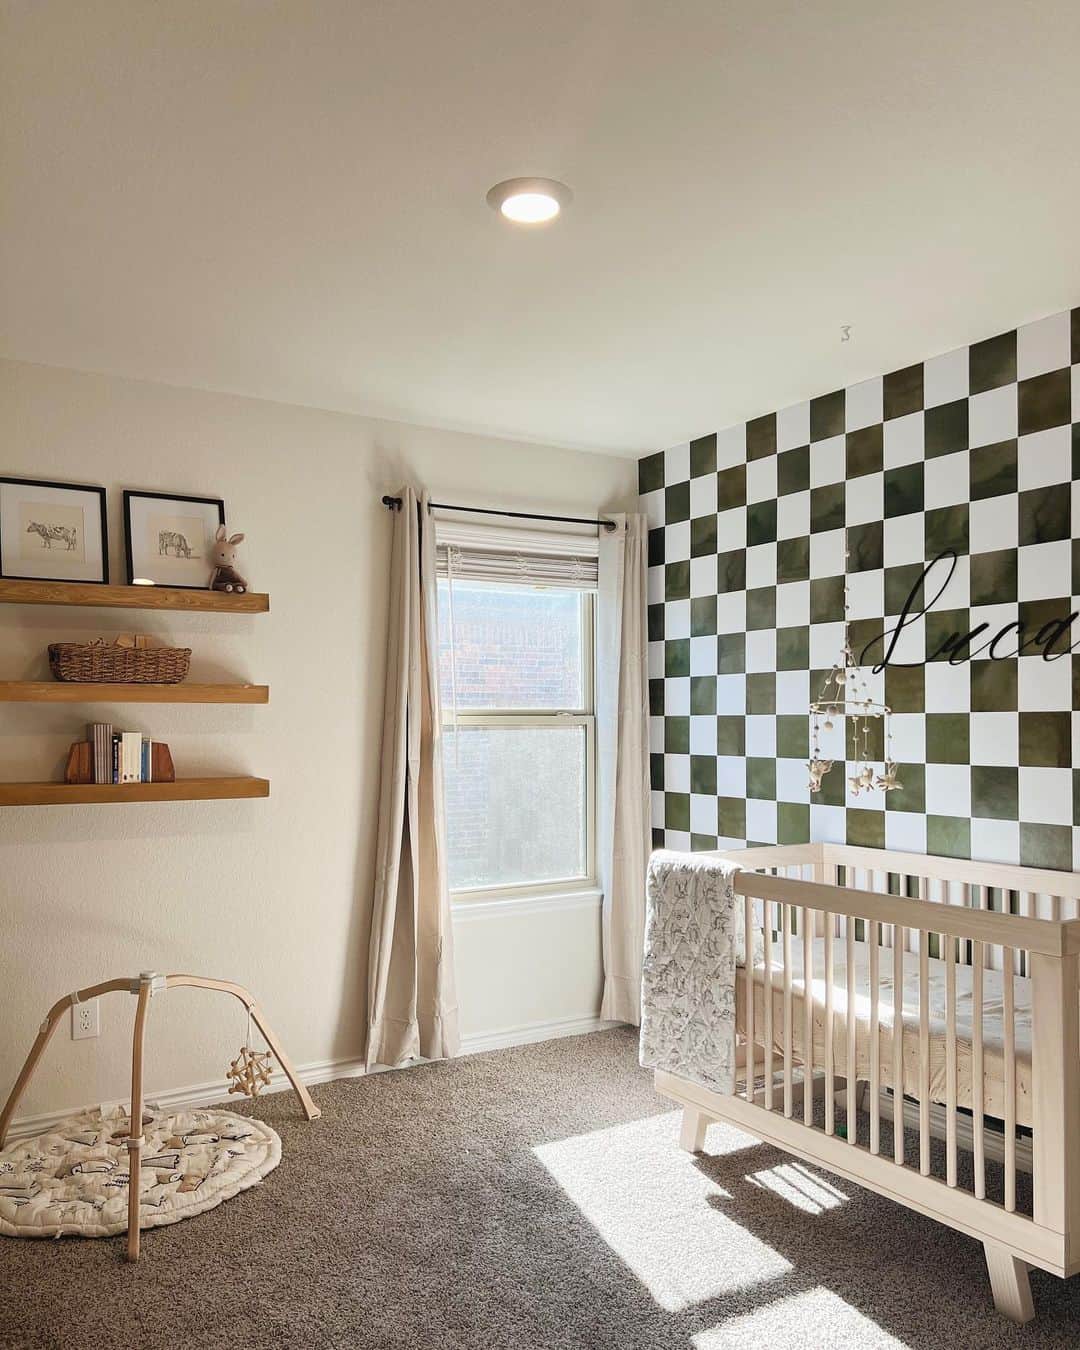 Captivating Black and White Checkered Nursery Wall